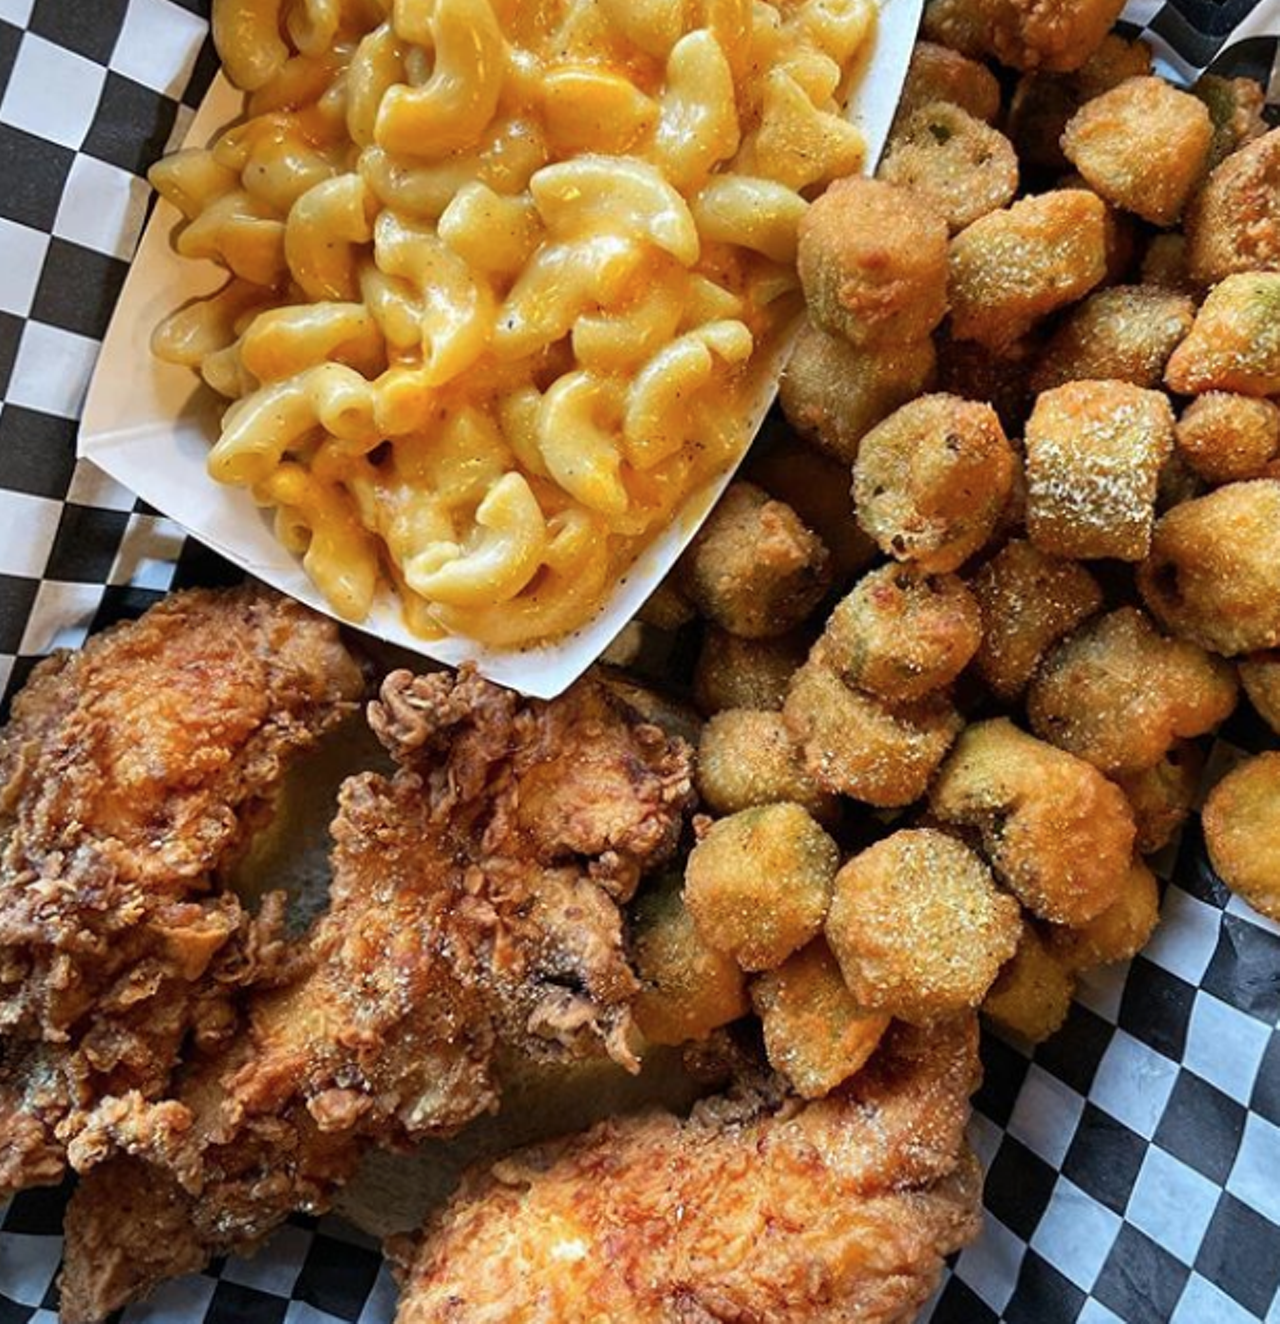 The Rolling Rooster
19141 Stone Oak Pkwy, (726) 444-0352, facebook.com/RollingRoosterStoneOak
Choose from a variety of wing possibilities like mango habanero and Chicago mild sauce, and take it to the next level with one of the Rolling Rooster’s signature buttermilk waffles.
Photo via Instagram / joshiethefoodie